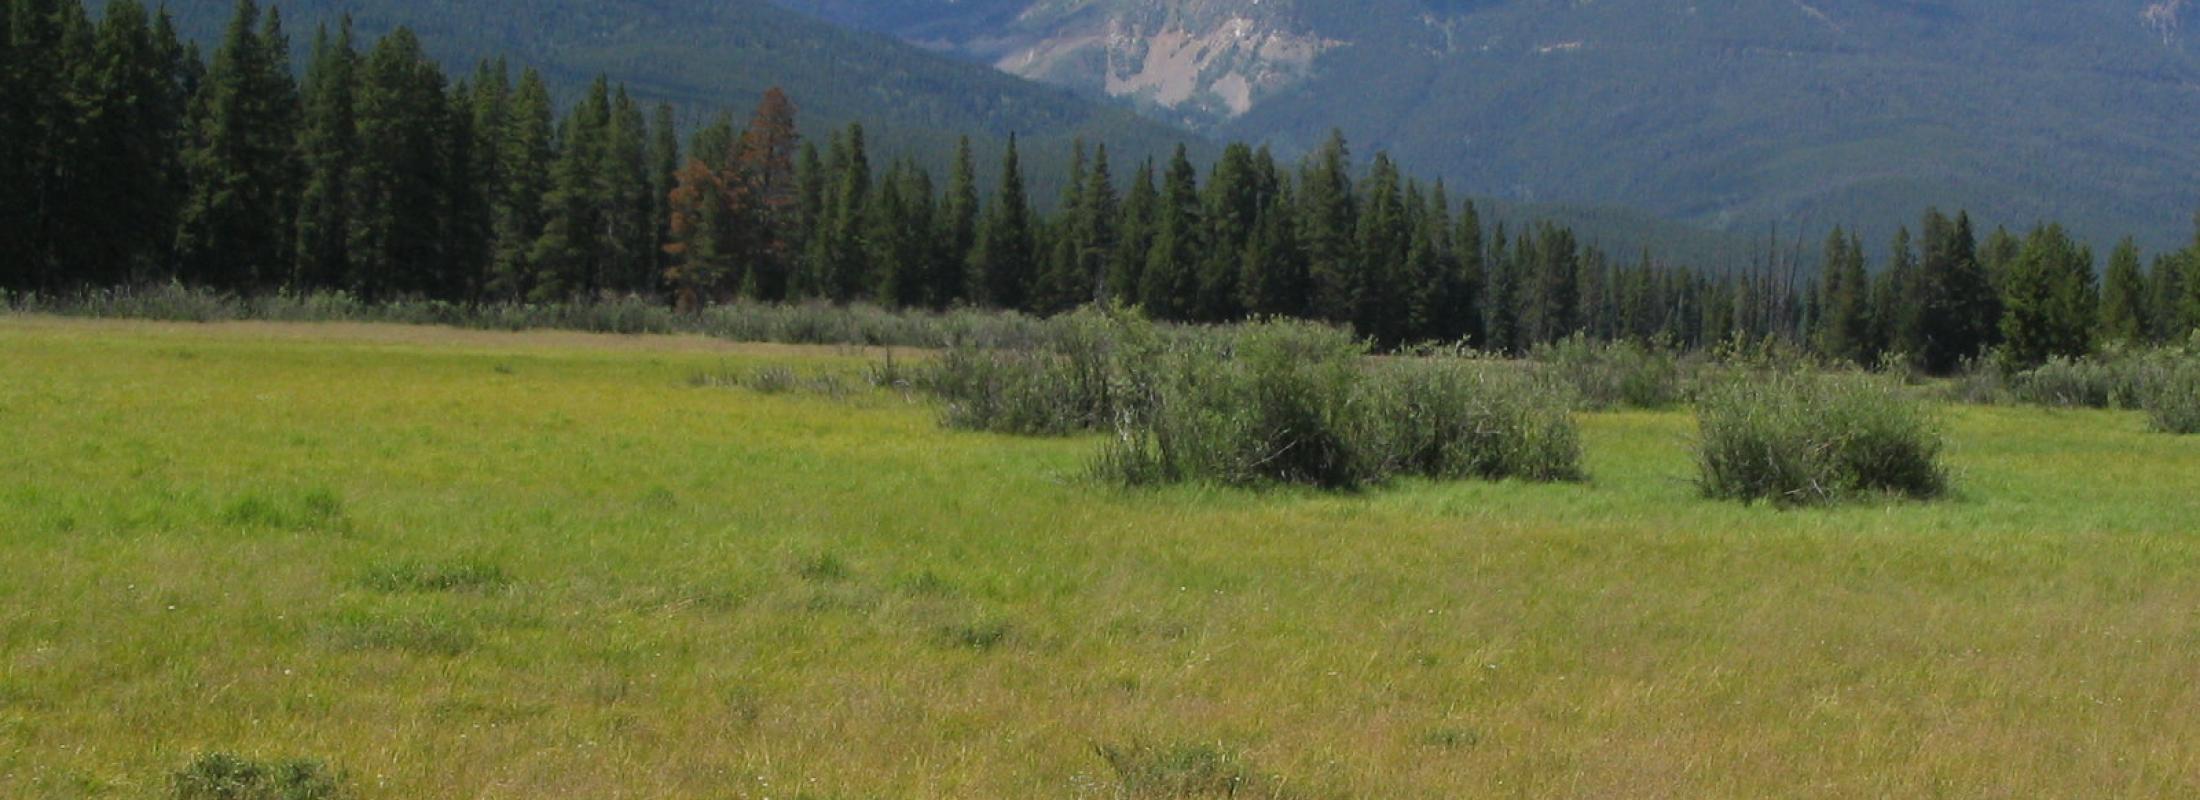 Photo of the Kawuneeche Valley, Rocky Mountain National Park, Colorado, taken by Ken Lund, Creative Commons license